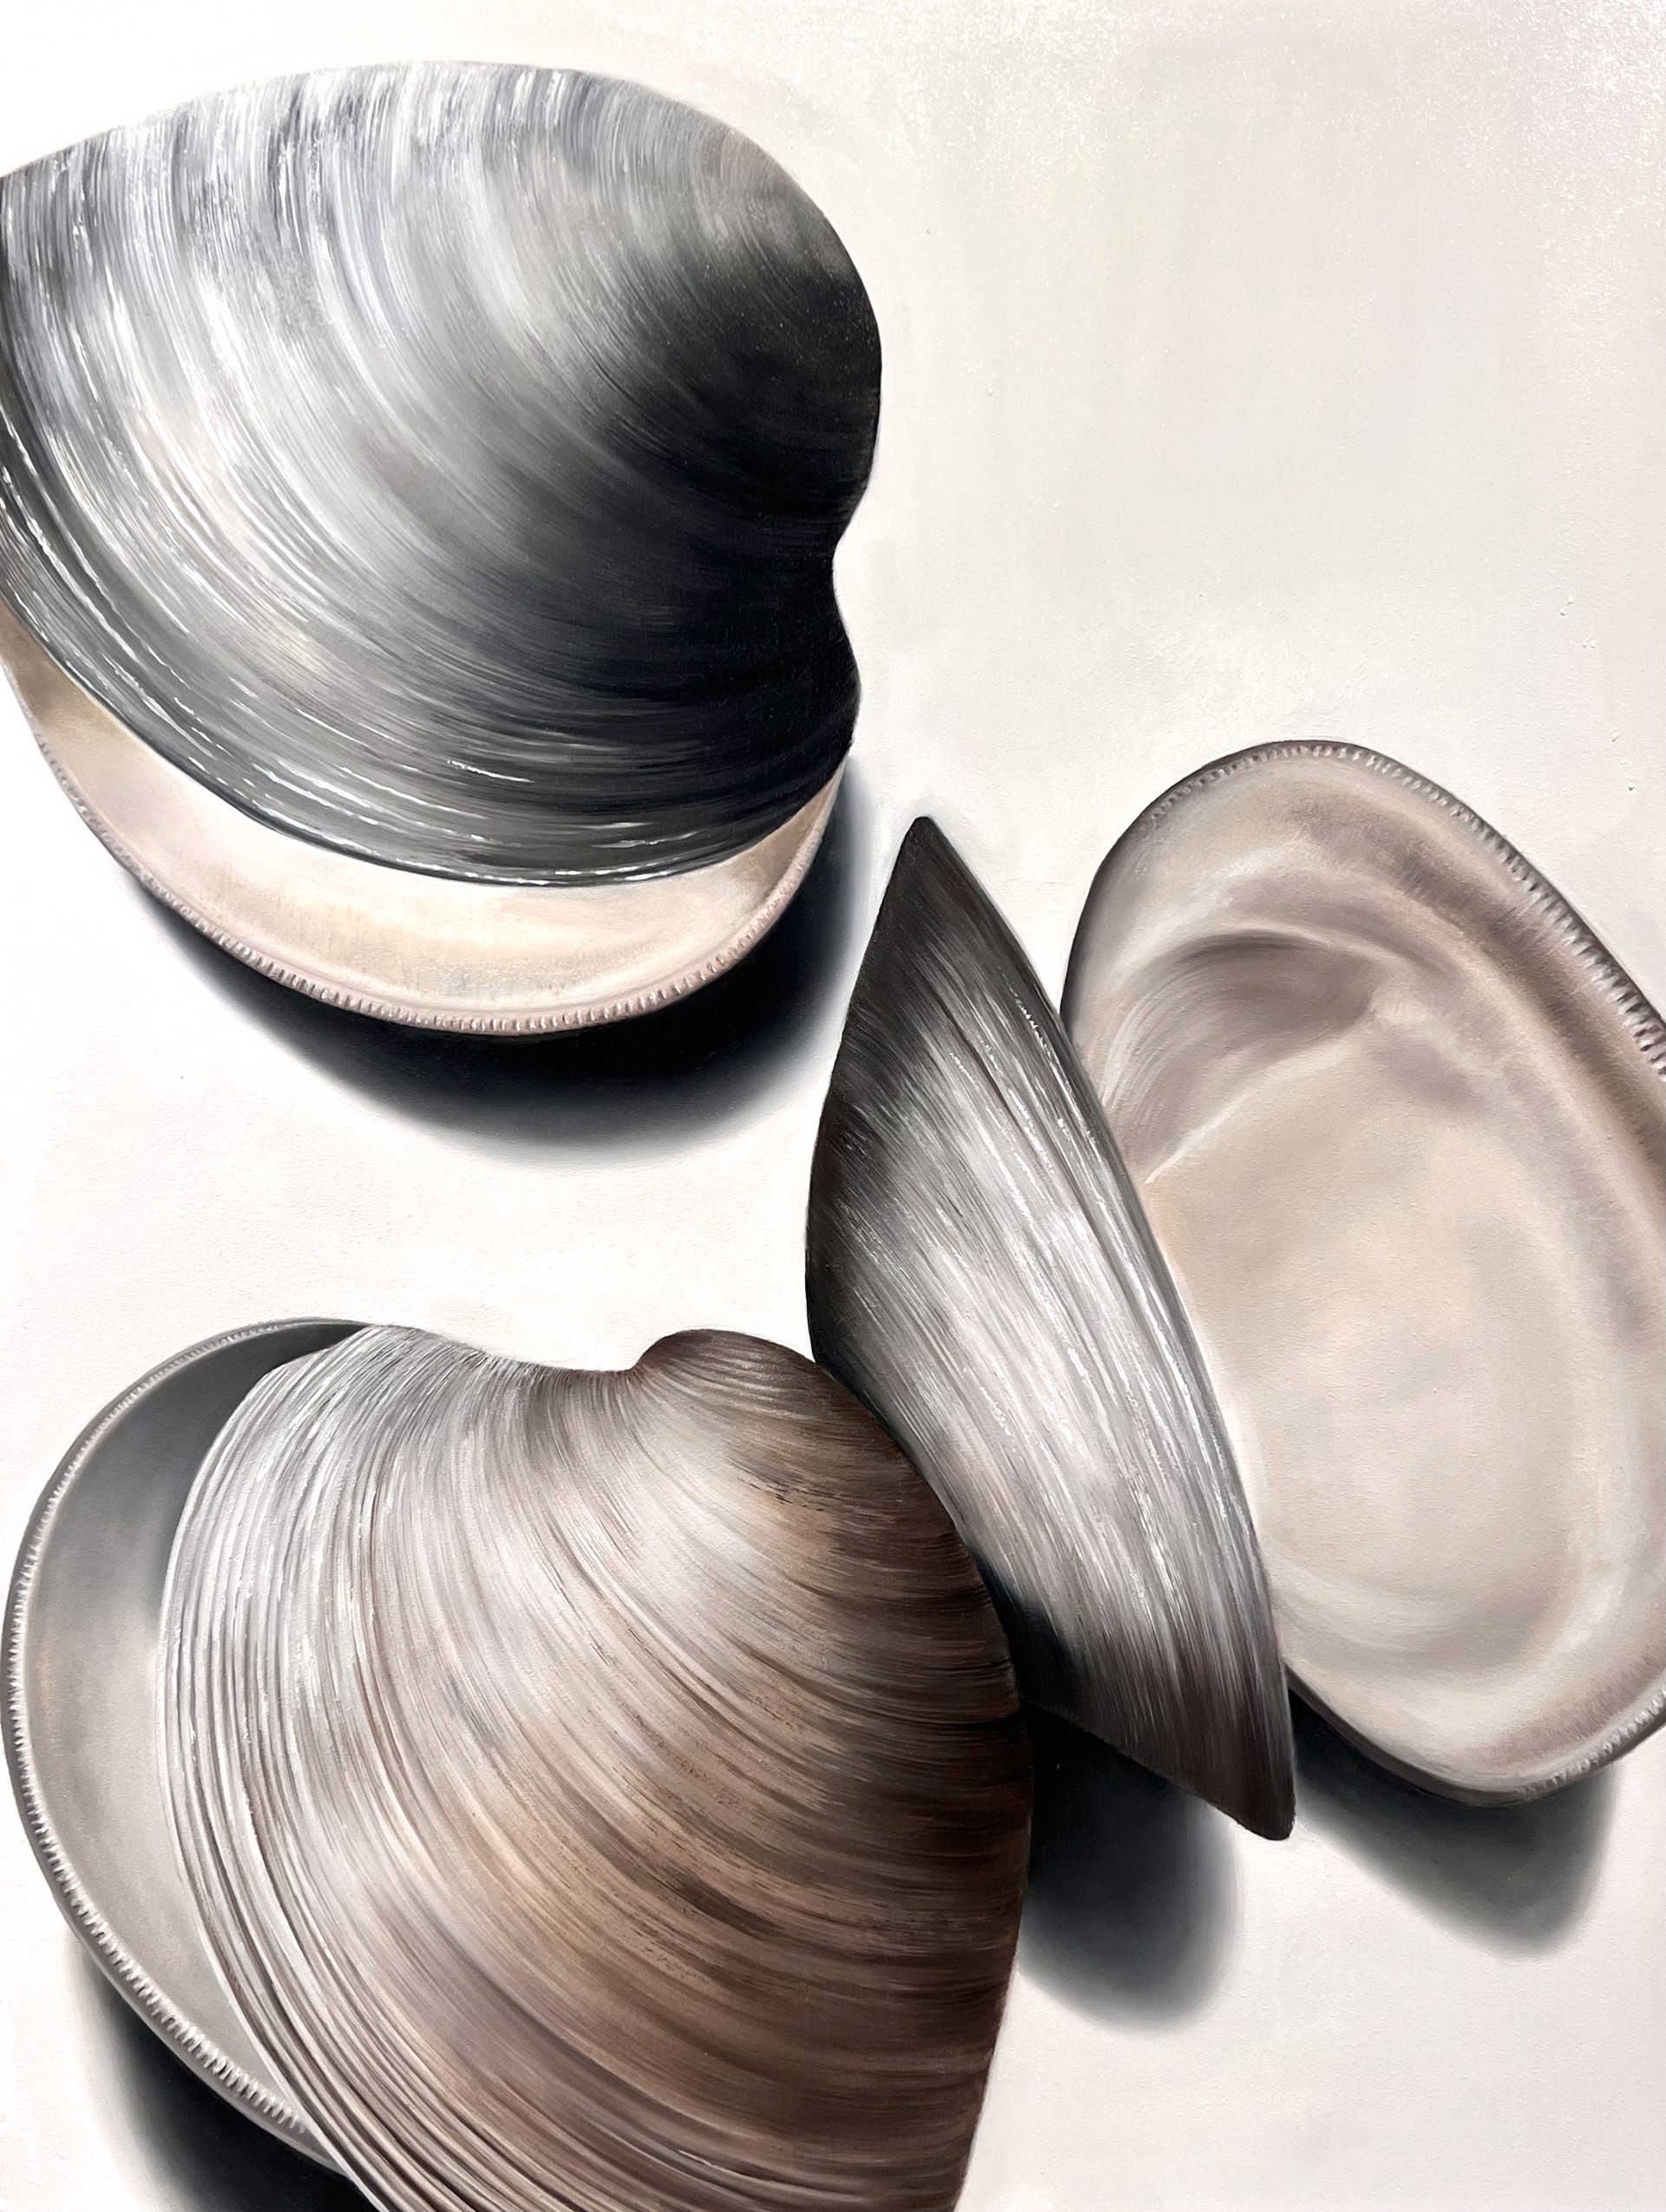 Dancing Clams No. 18 by Renee Levin